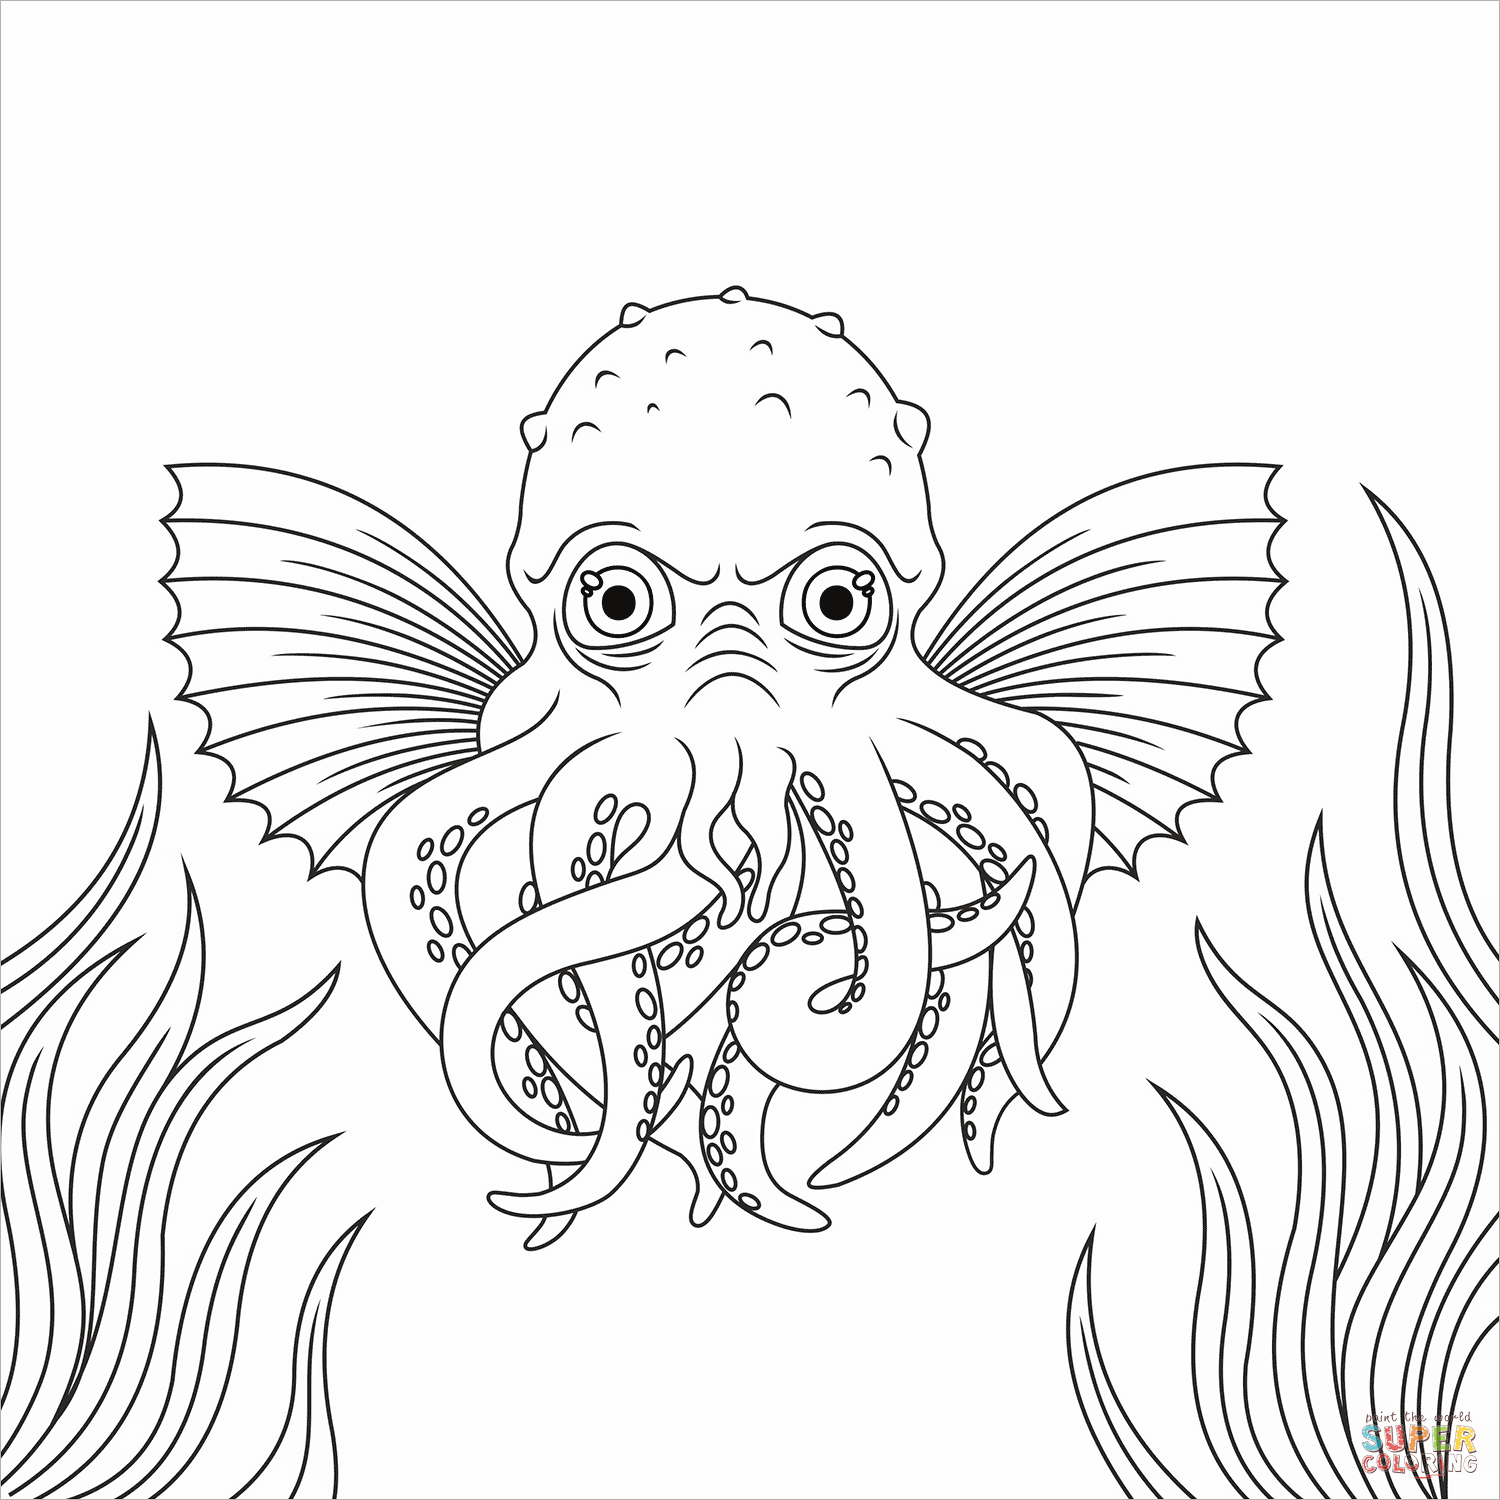 Cthulhu coloring page free printable coloring pages